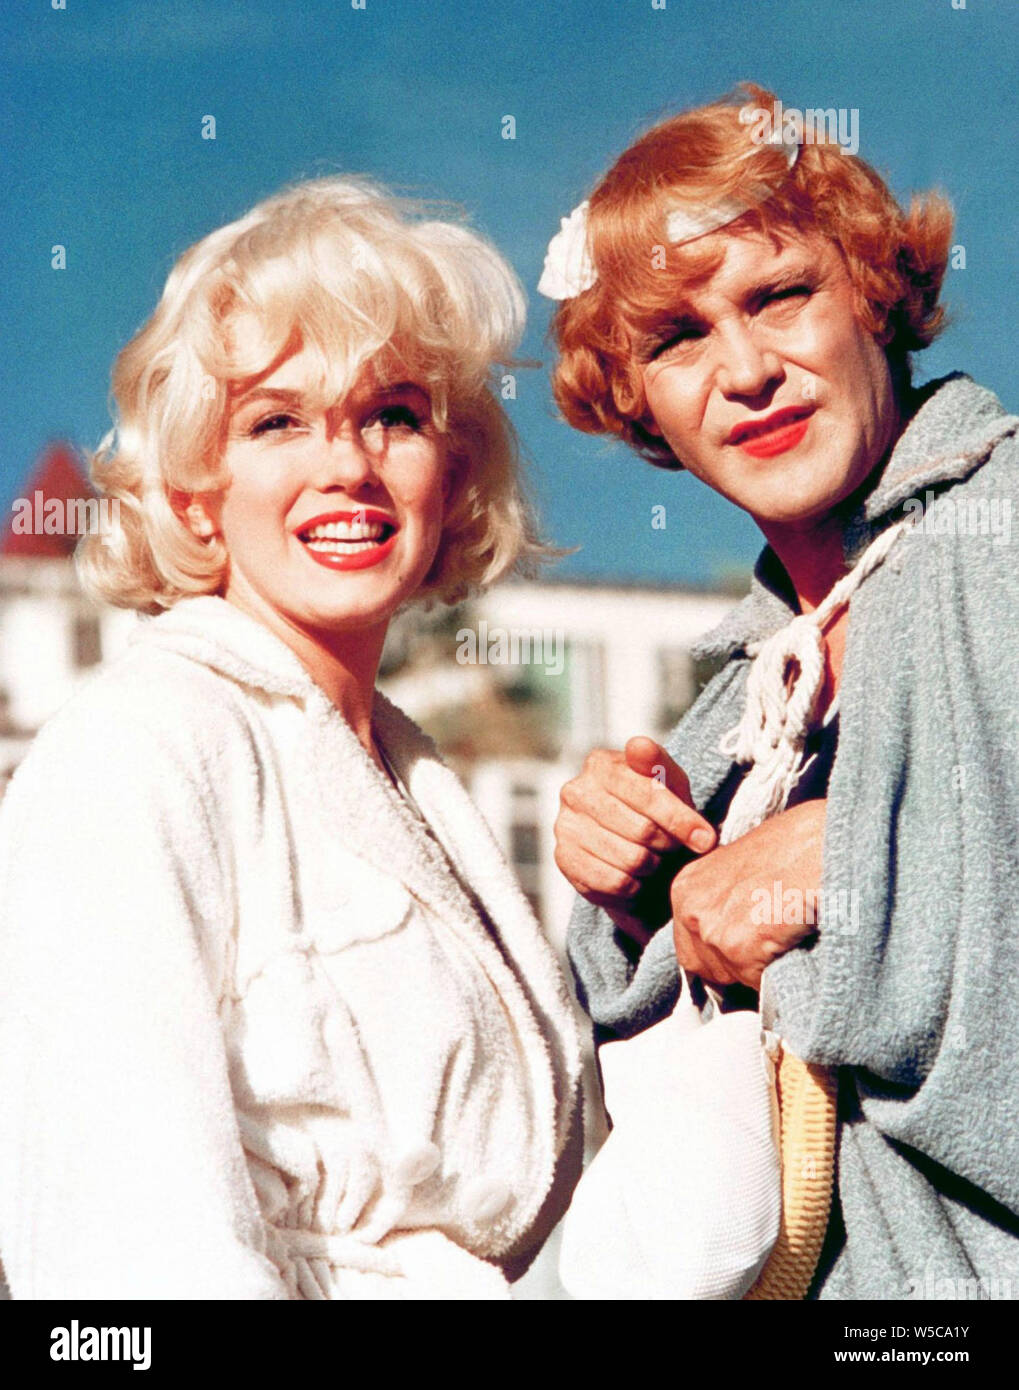 JACK LEMMON and MARILYN MONROE in SOME LIKE IT HOT (1959), directed by BILLY WILDER. Credit: UNITED ARTISTS / Album Stock Photo